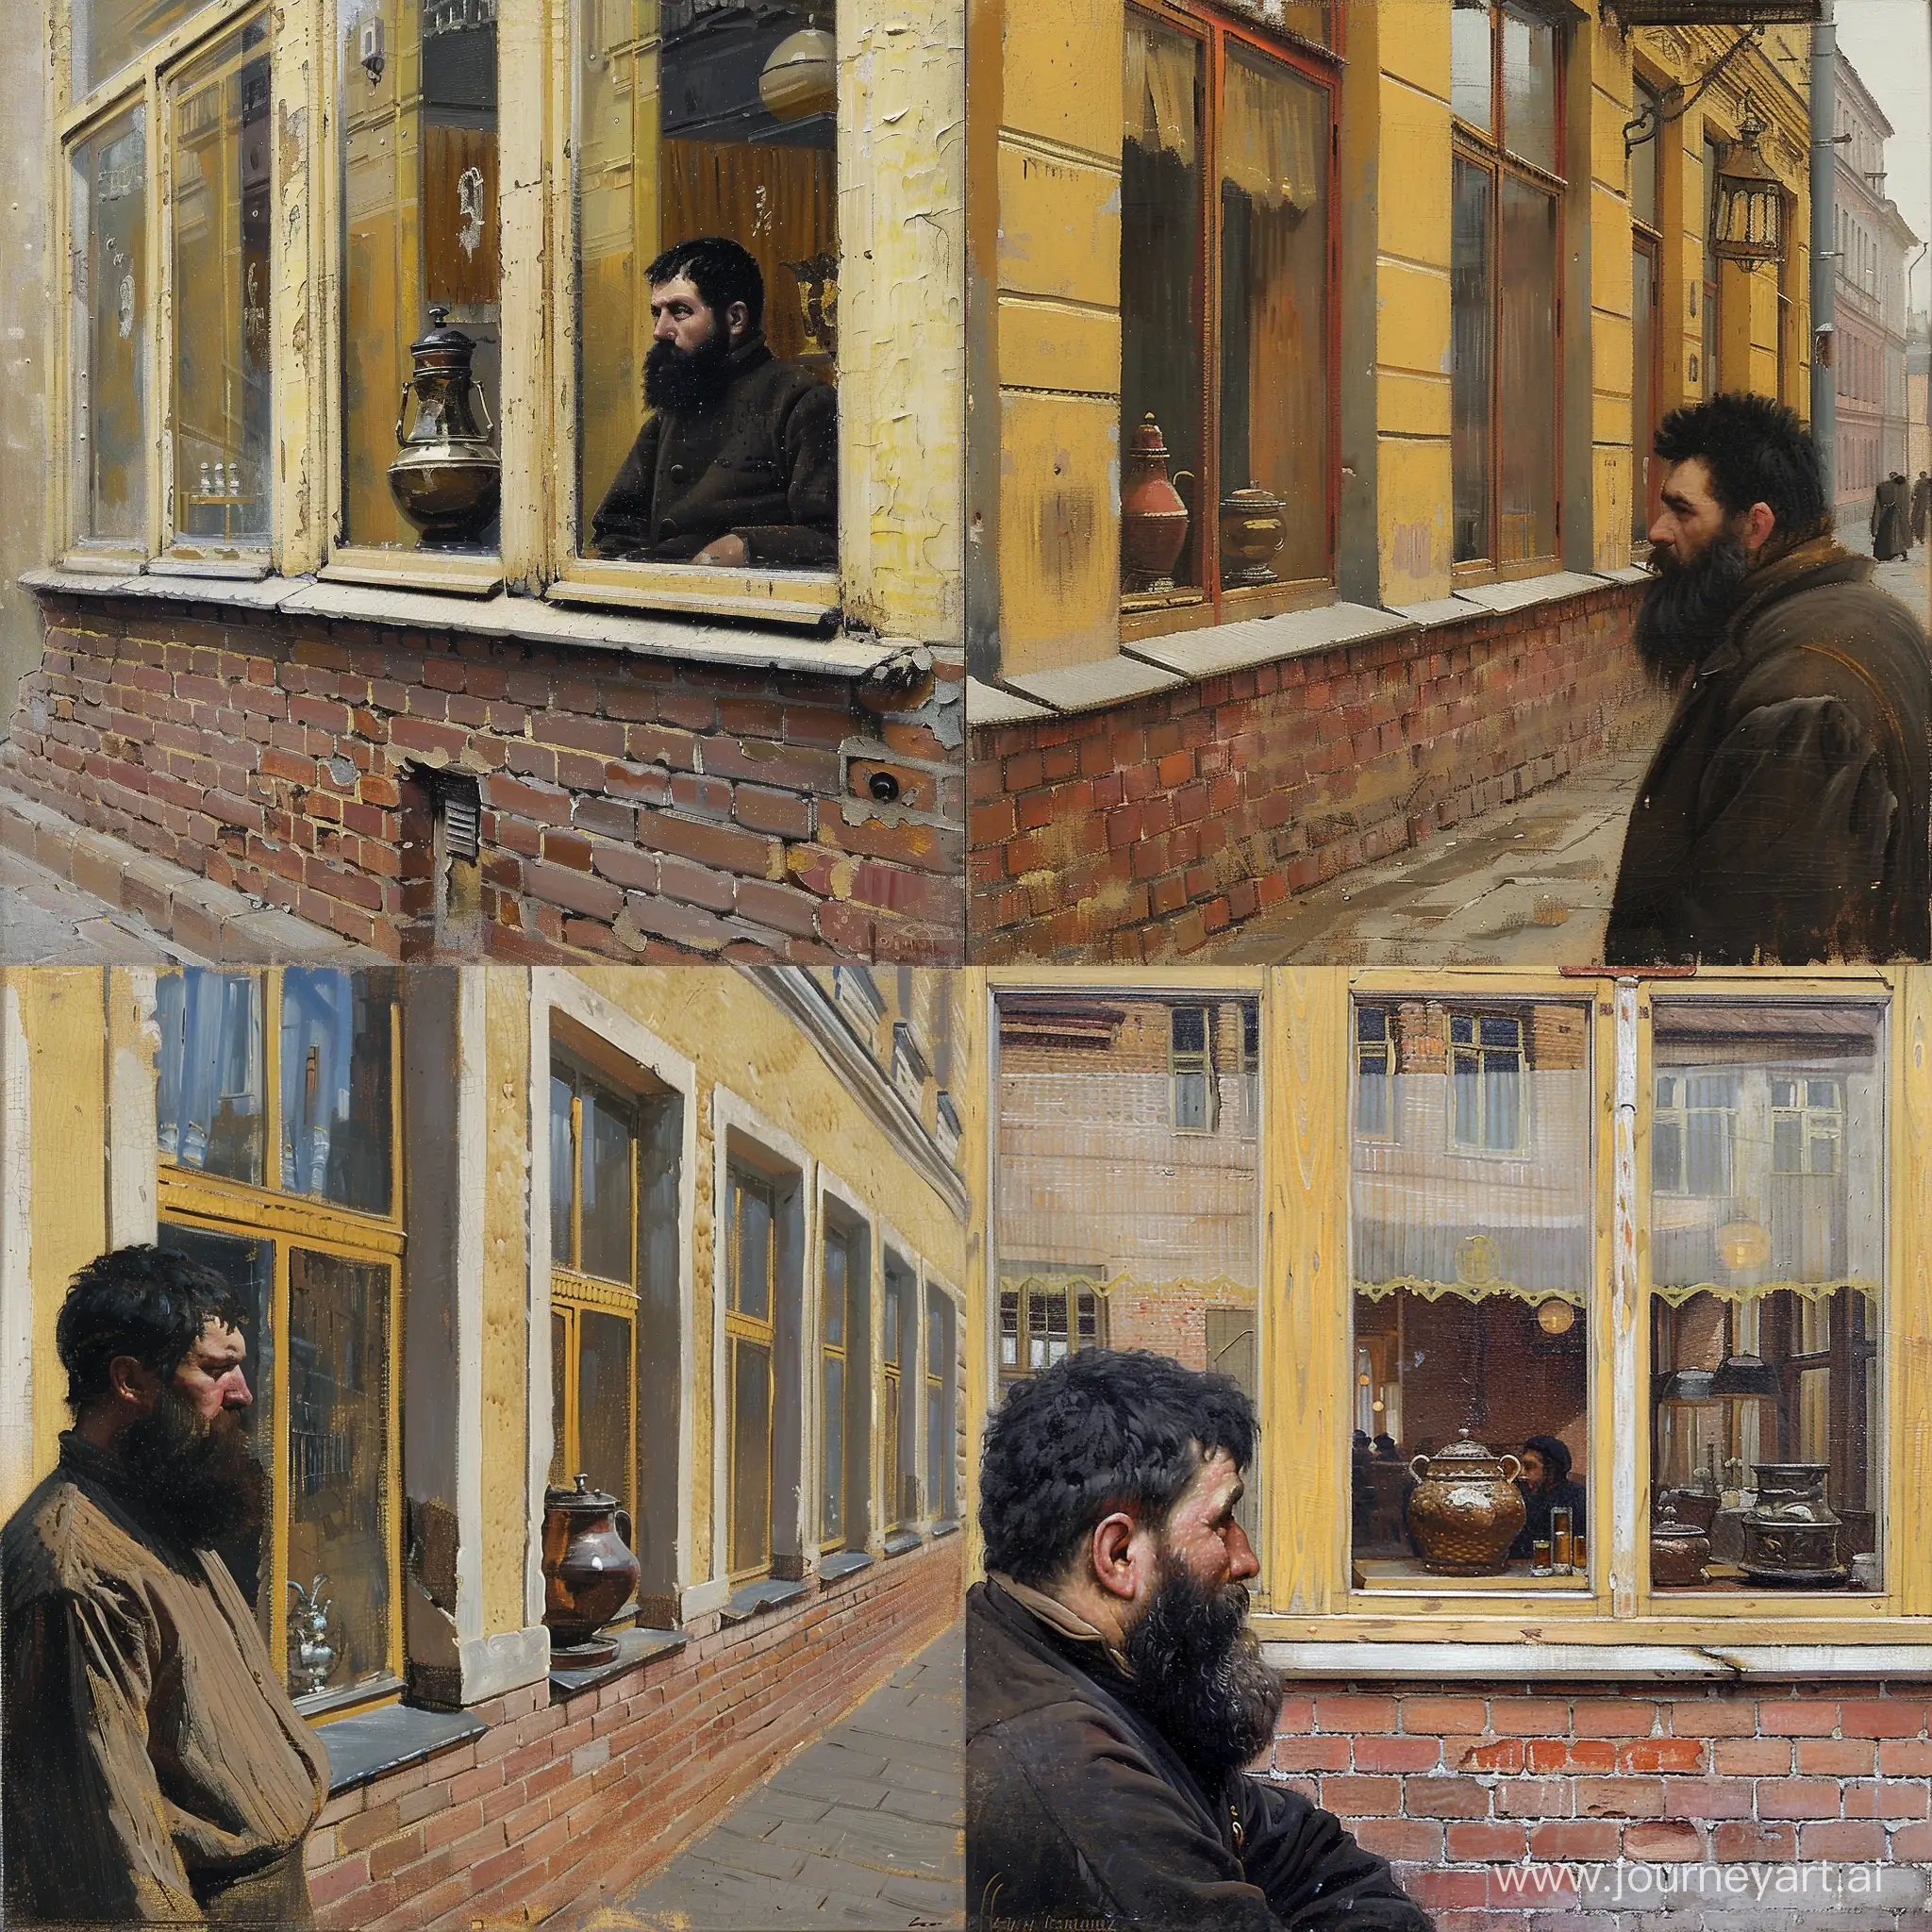 19thCentury-Russian-Empire-Hotel-with-Samovar-Realistic-Depiction-of-Everyday-Life